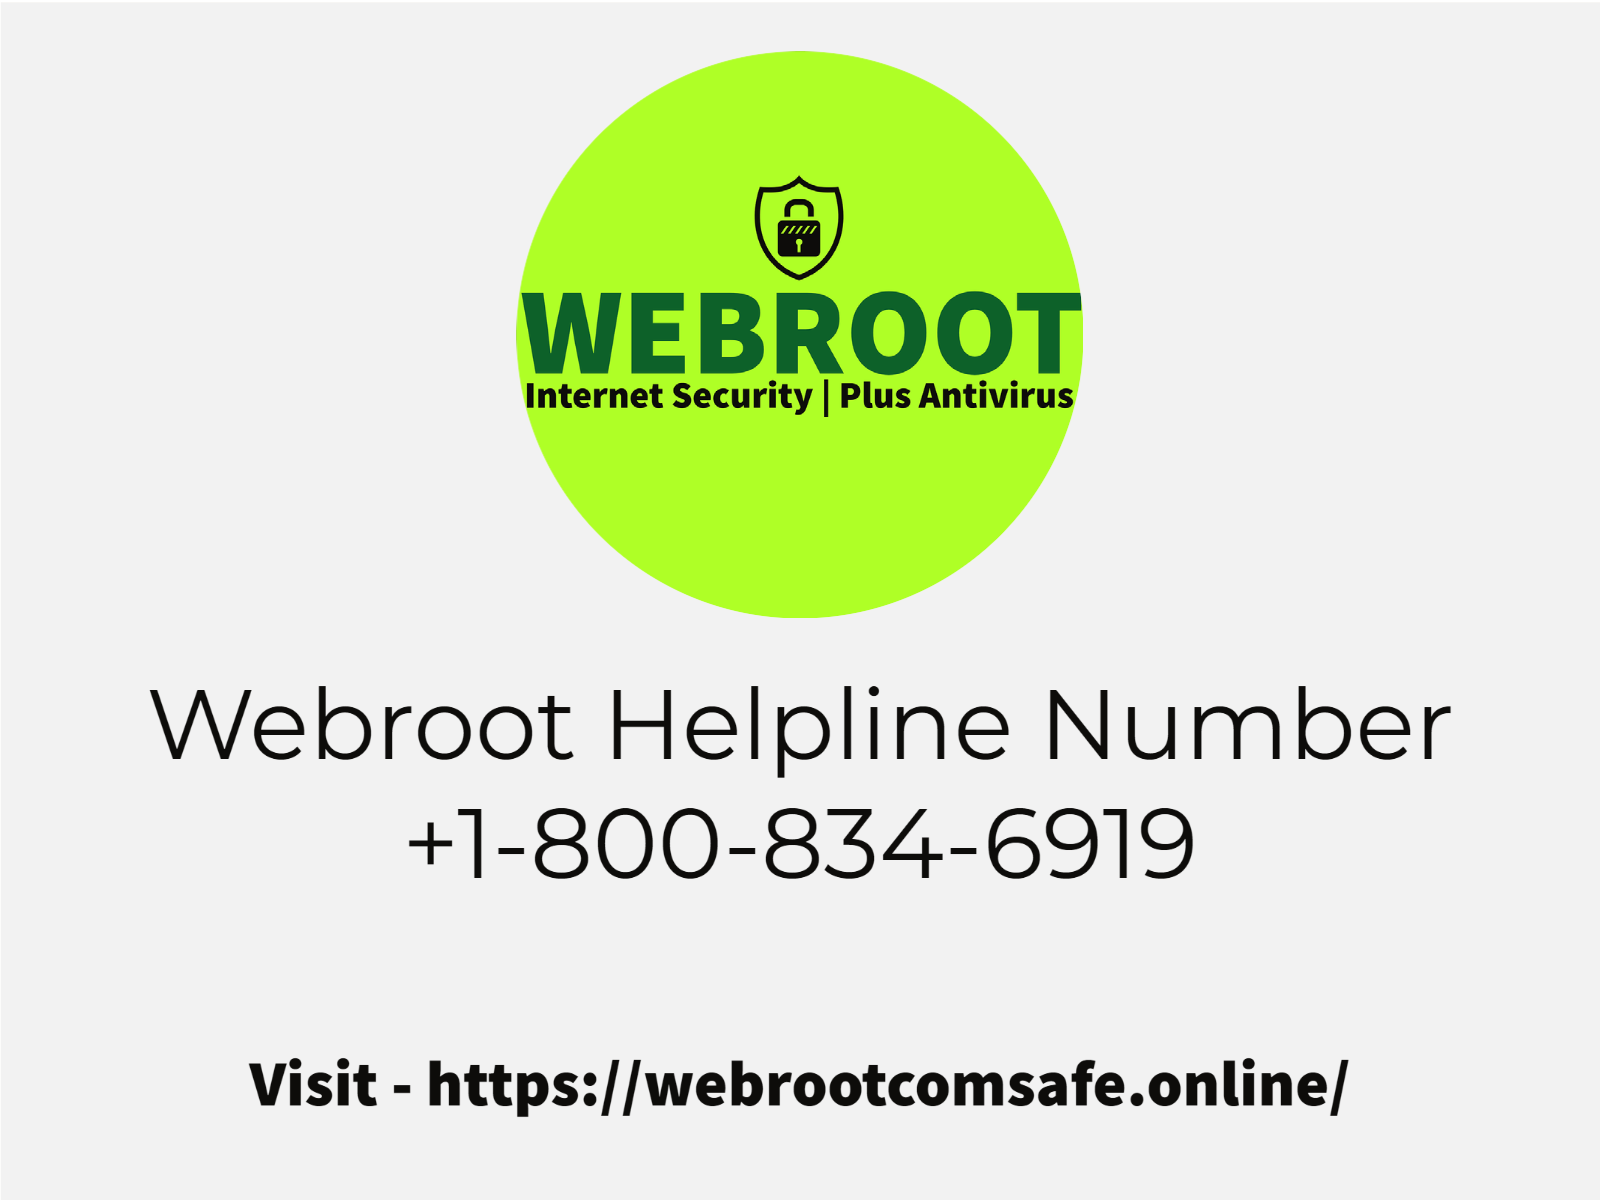 Download and Install webroot with Webroot Helpline Number by Webroot